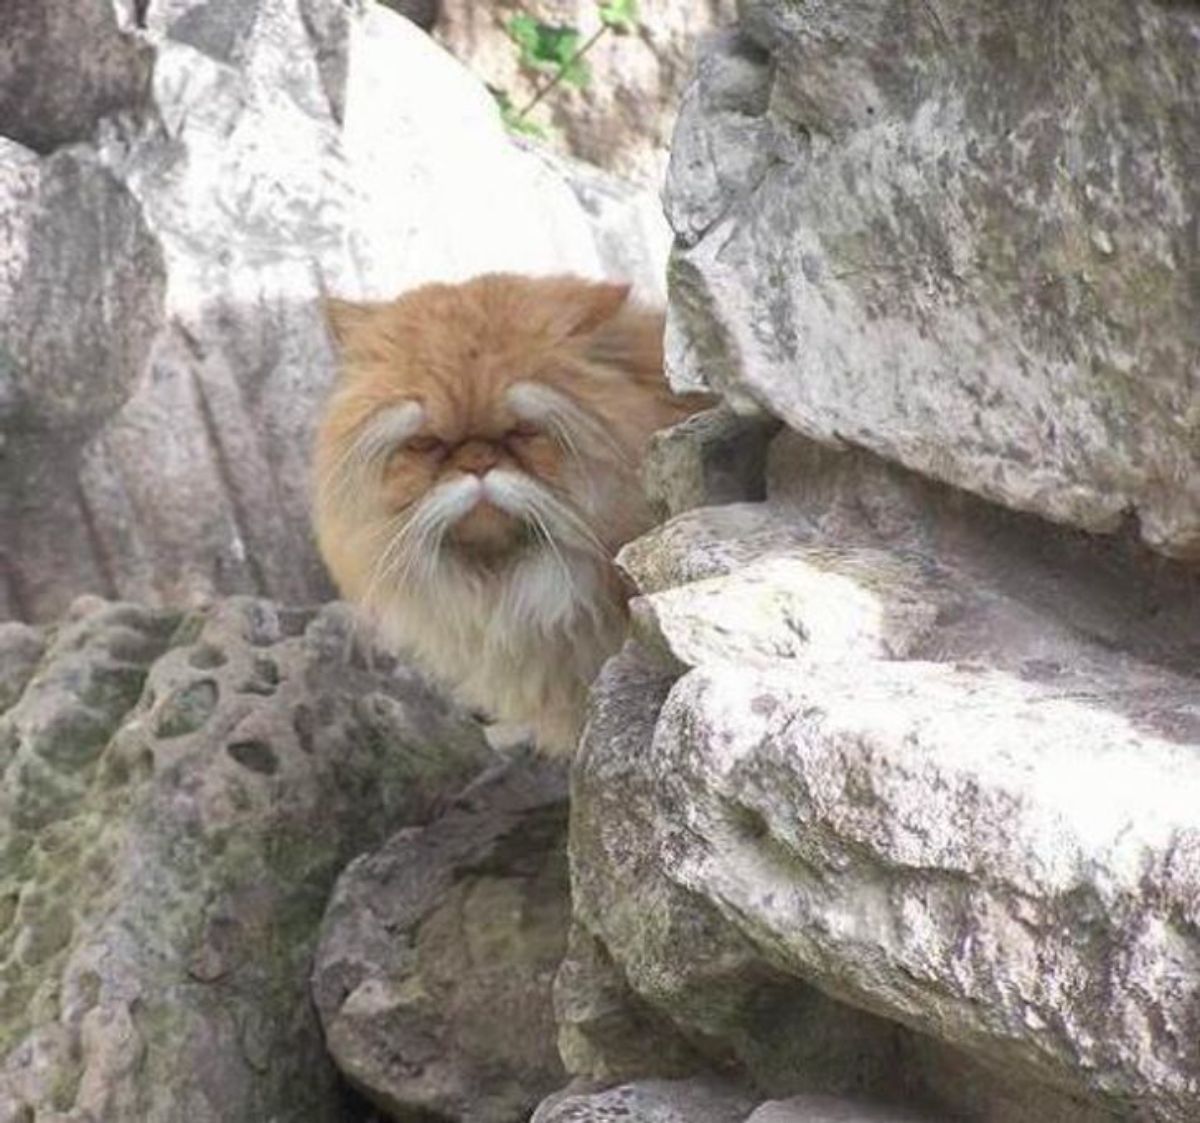 fluffy orange cat with white fur sticking out fron the eyebrows and the whiskers peeking from behind some rocks